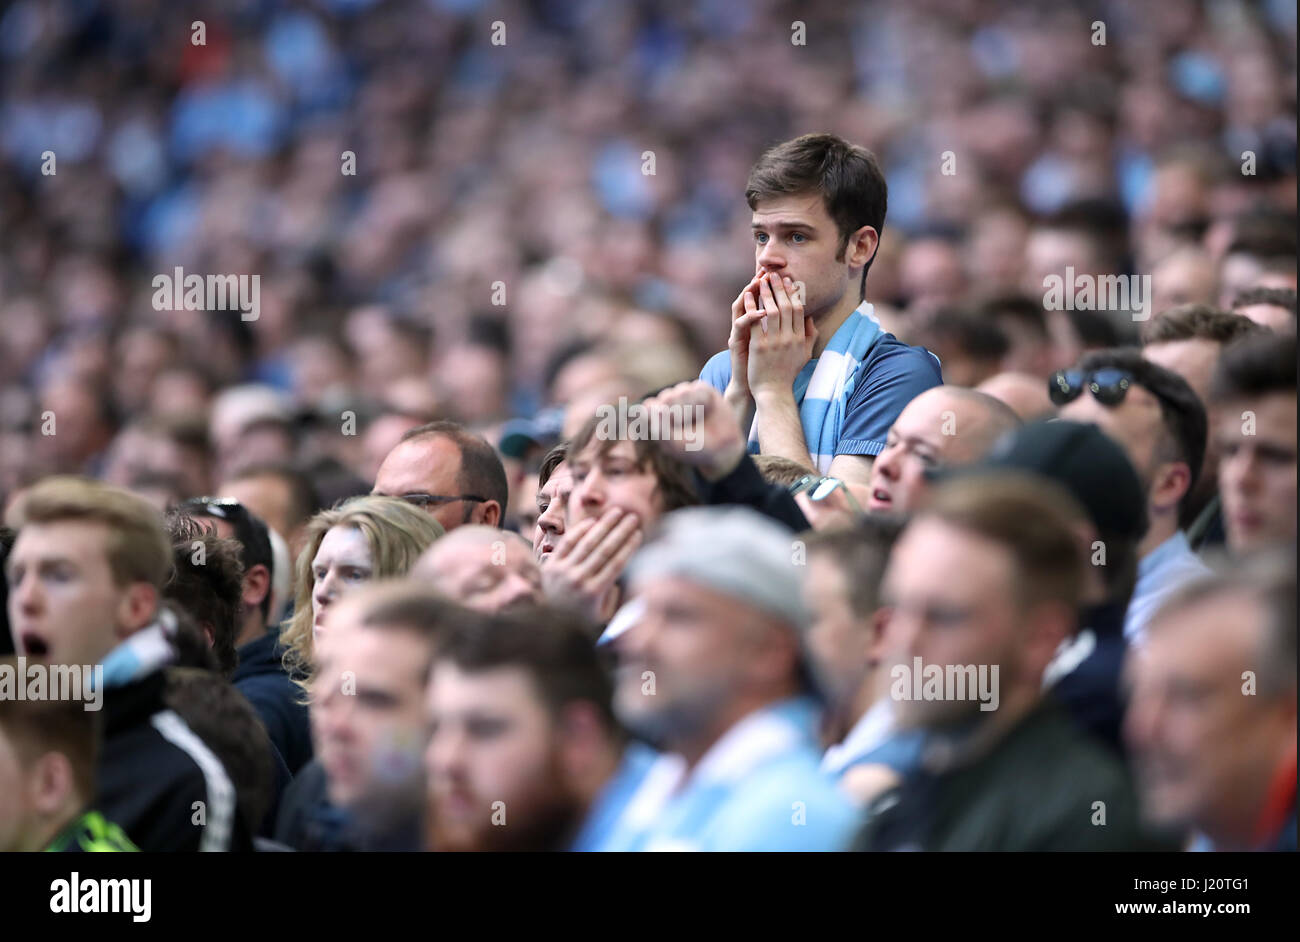 Manchester City fans show dejection in the stands after their side concede during extras time of the Emirates FA Cup, Semi Final match at Wembley Stadium, London. PRESS ASSOCIATION Photo. Picture date: Sunday April 23, 2017. See PA story SOCCER Arsenal. Photo credit should read: Nick Potts/PA Wire. RESTRICTIONS: No use with unauthorised audio, video, data, fixture lists, club/league logos or 'live' services. Online in-match use limited to 75 images, no video emulation. No use in betting, games or single club/league/player publications. Stock Photo